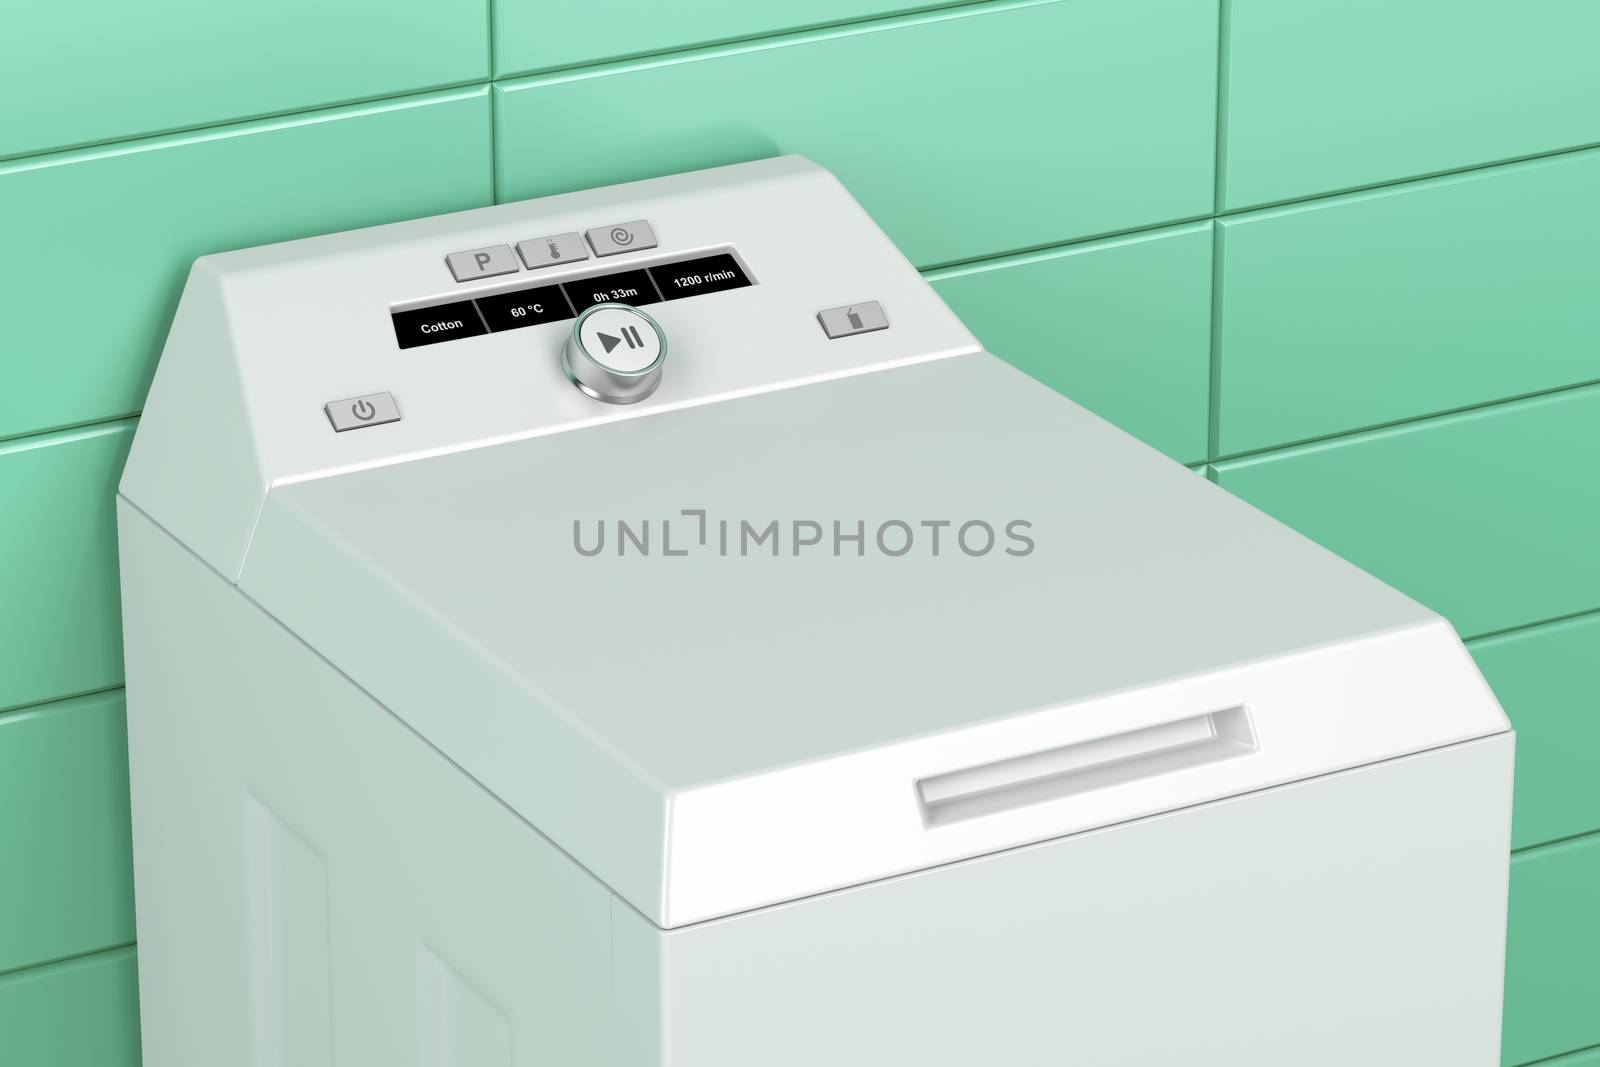 Top load washing machine by magraphics